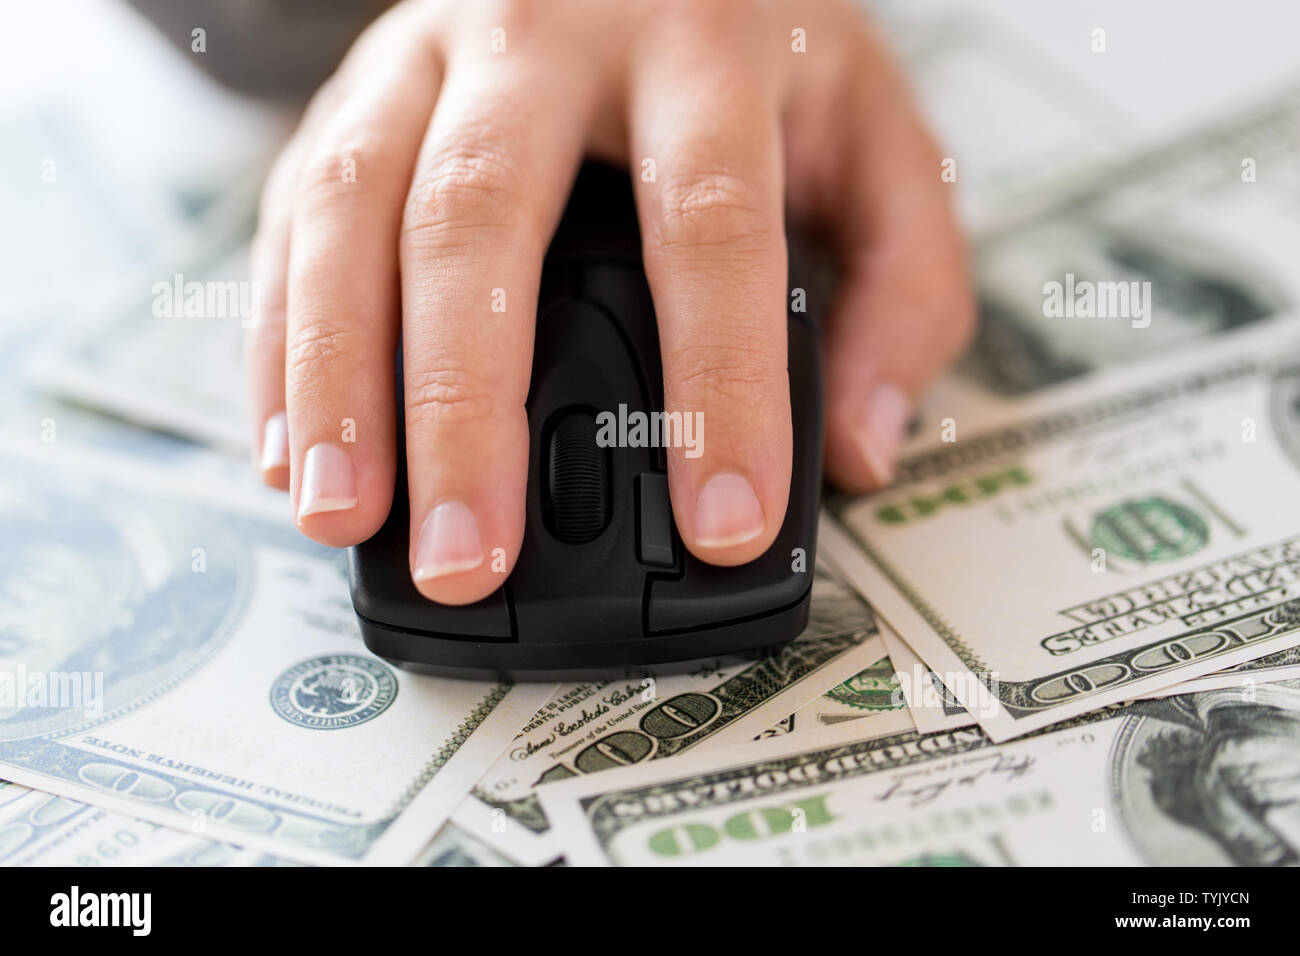 close up of hand with computer mouse on money Stock Photo